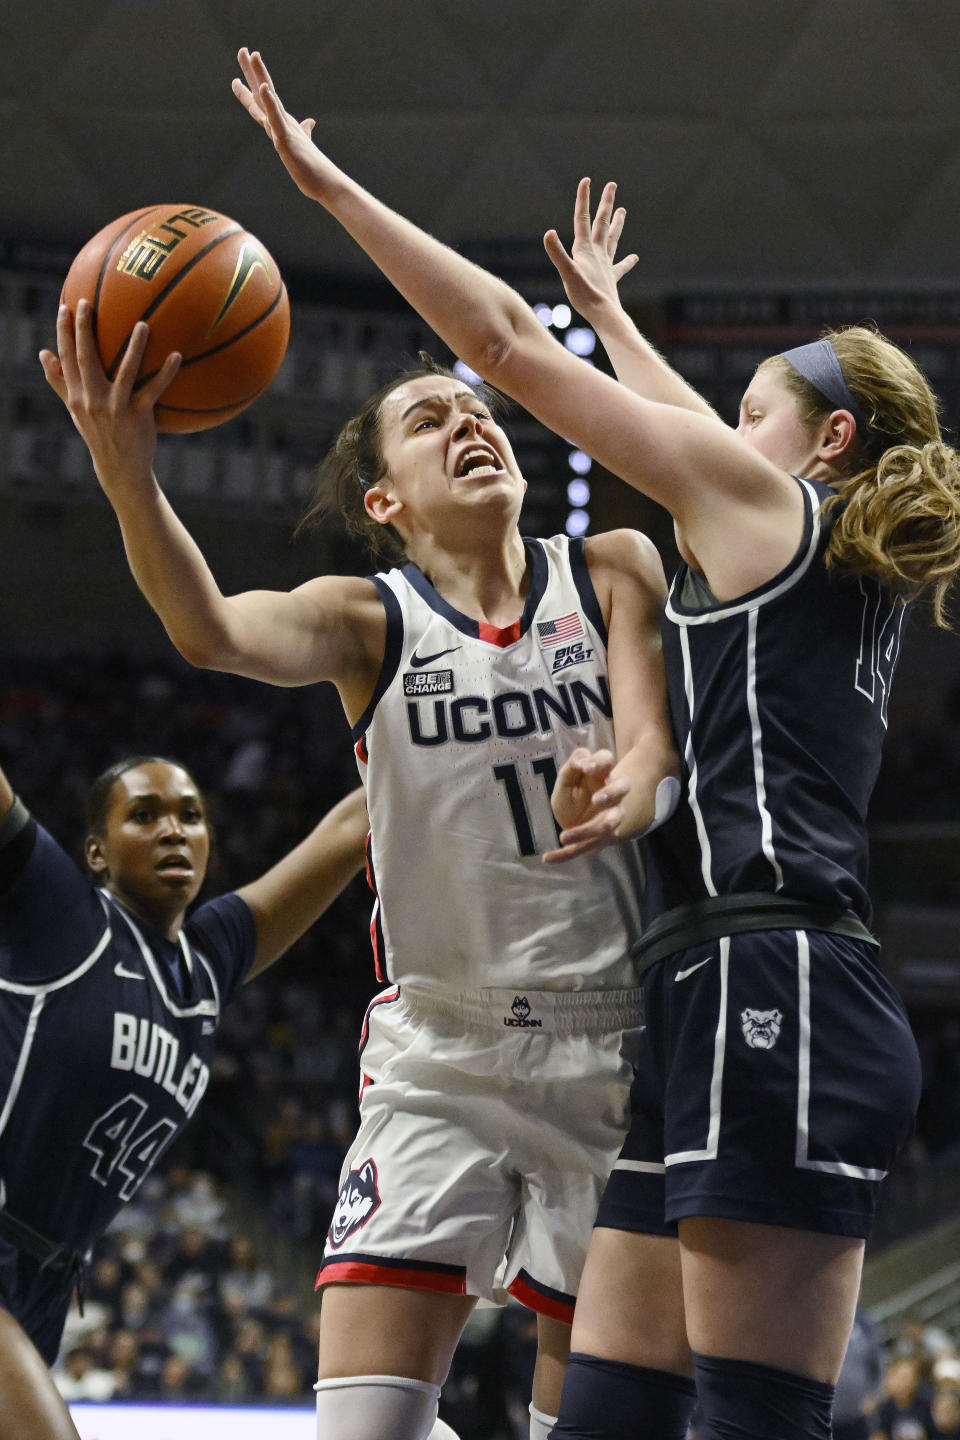 UConn's Lou Lopez-Senechal, left, shoots over Butler's Rachel McLimore in the first half of an NCAA college basketball game, Saturday, Jan. 21, 2023, in Storrs, Conn. (AP Photo/Jessica Hill)